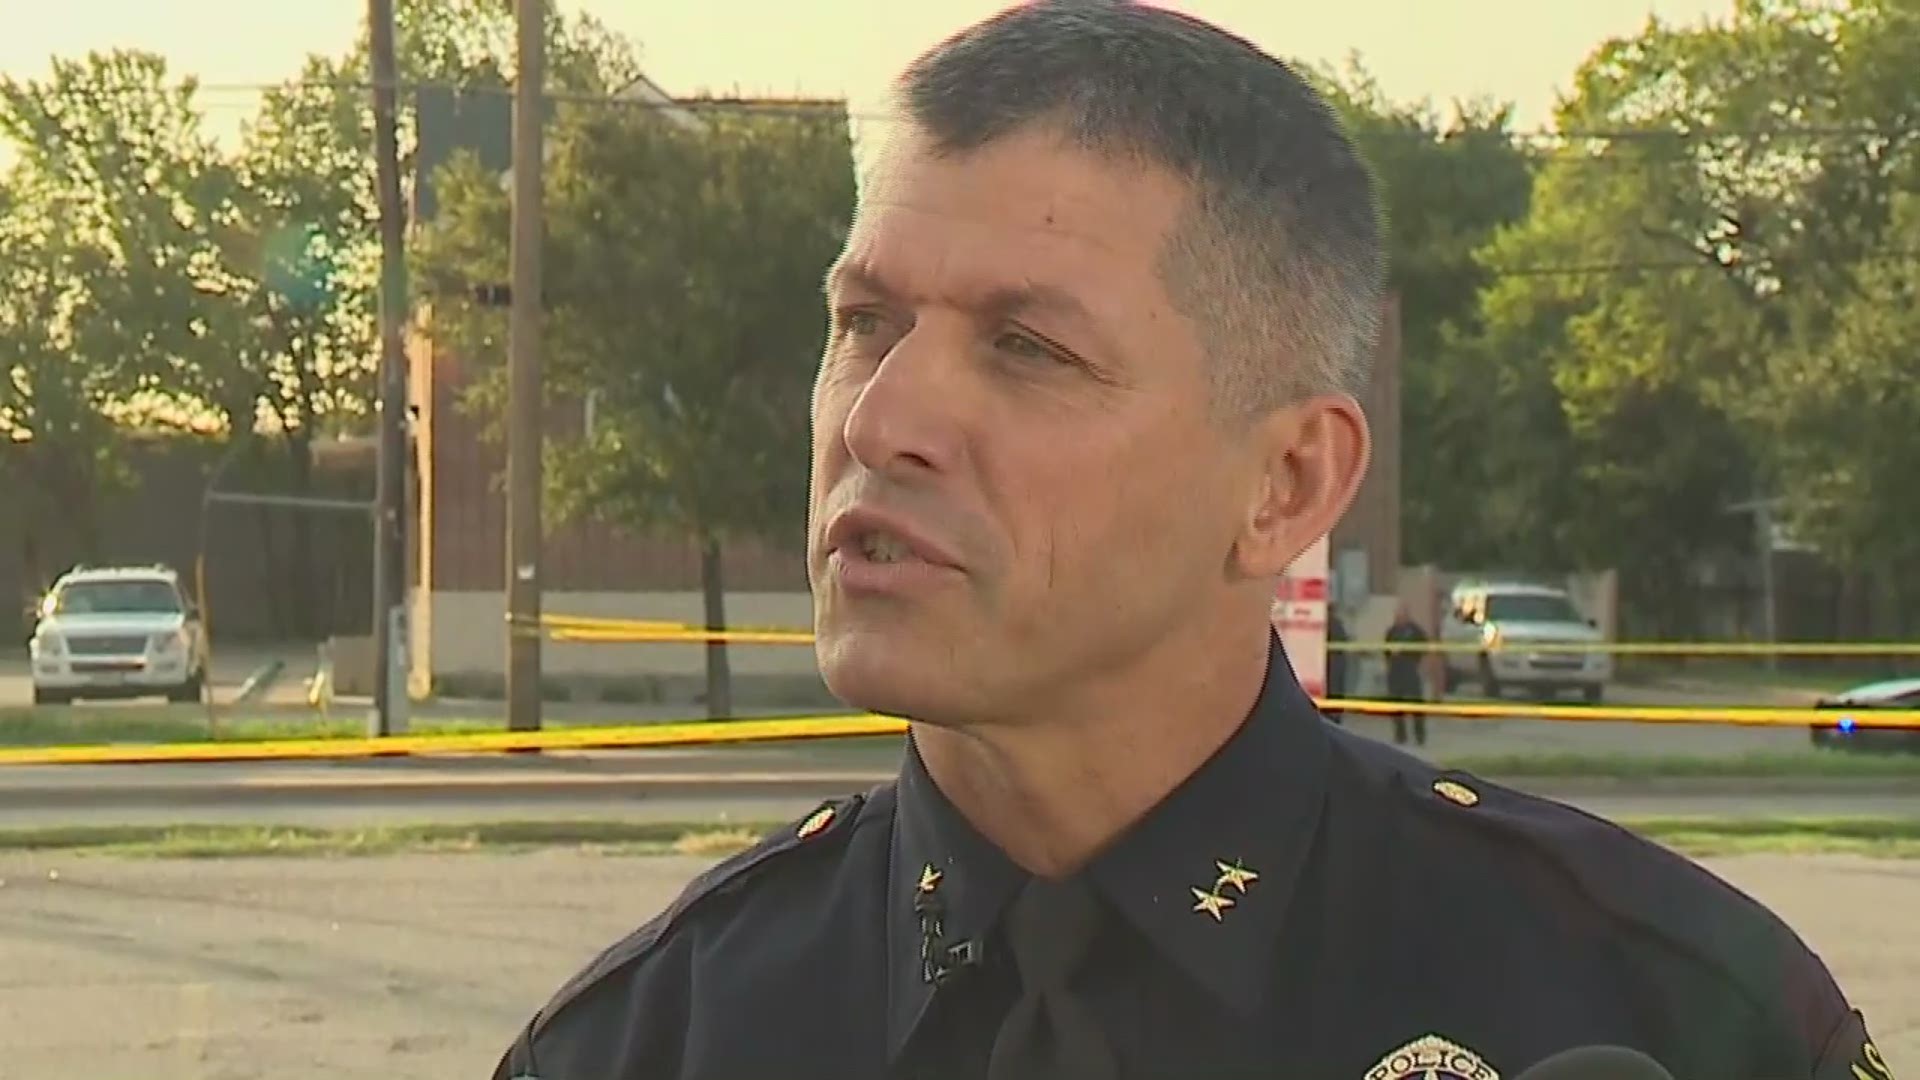 RAW VIDEO: Dallas police give update after officer shot